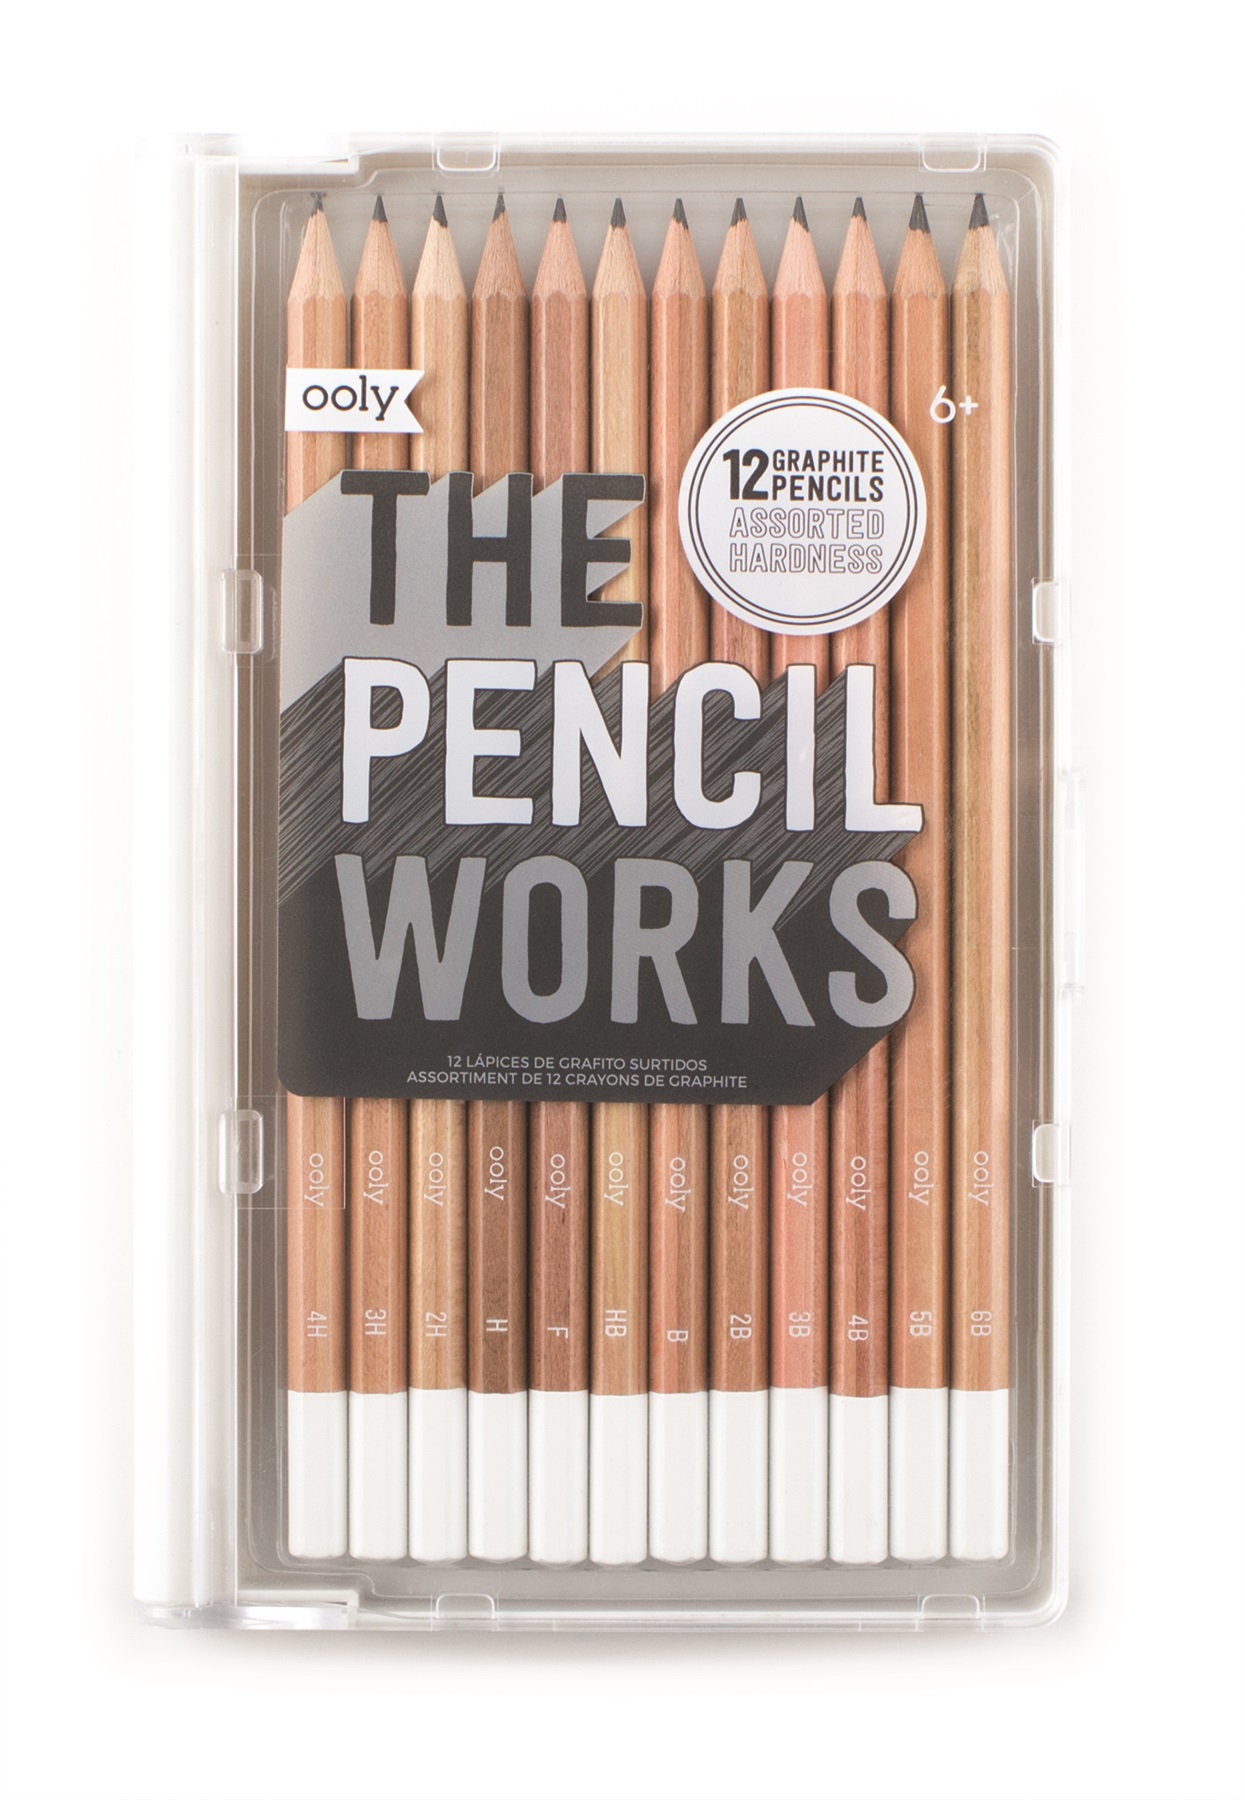 Ooly Pencil Works Graphite Pencils (Set of 12)